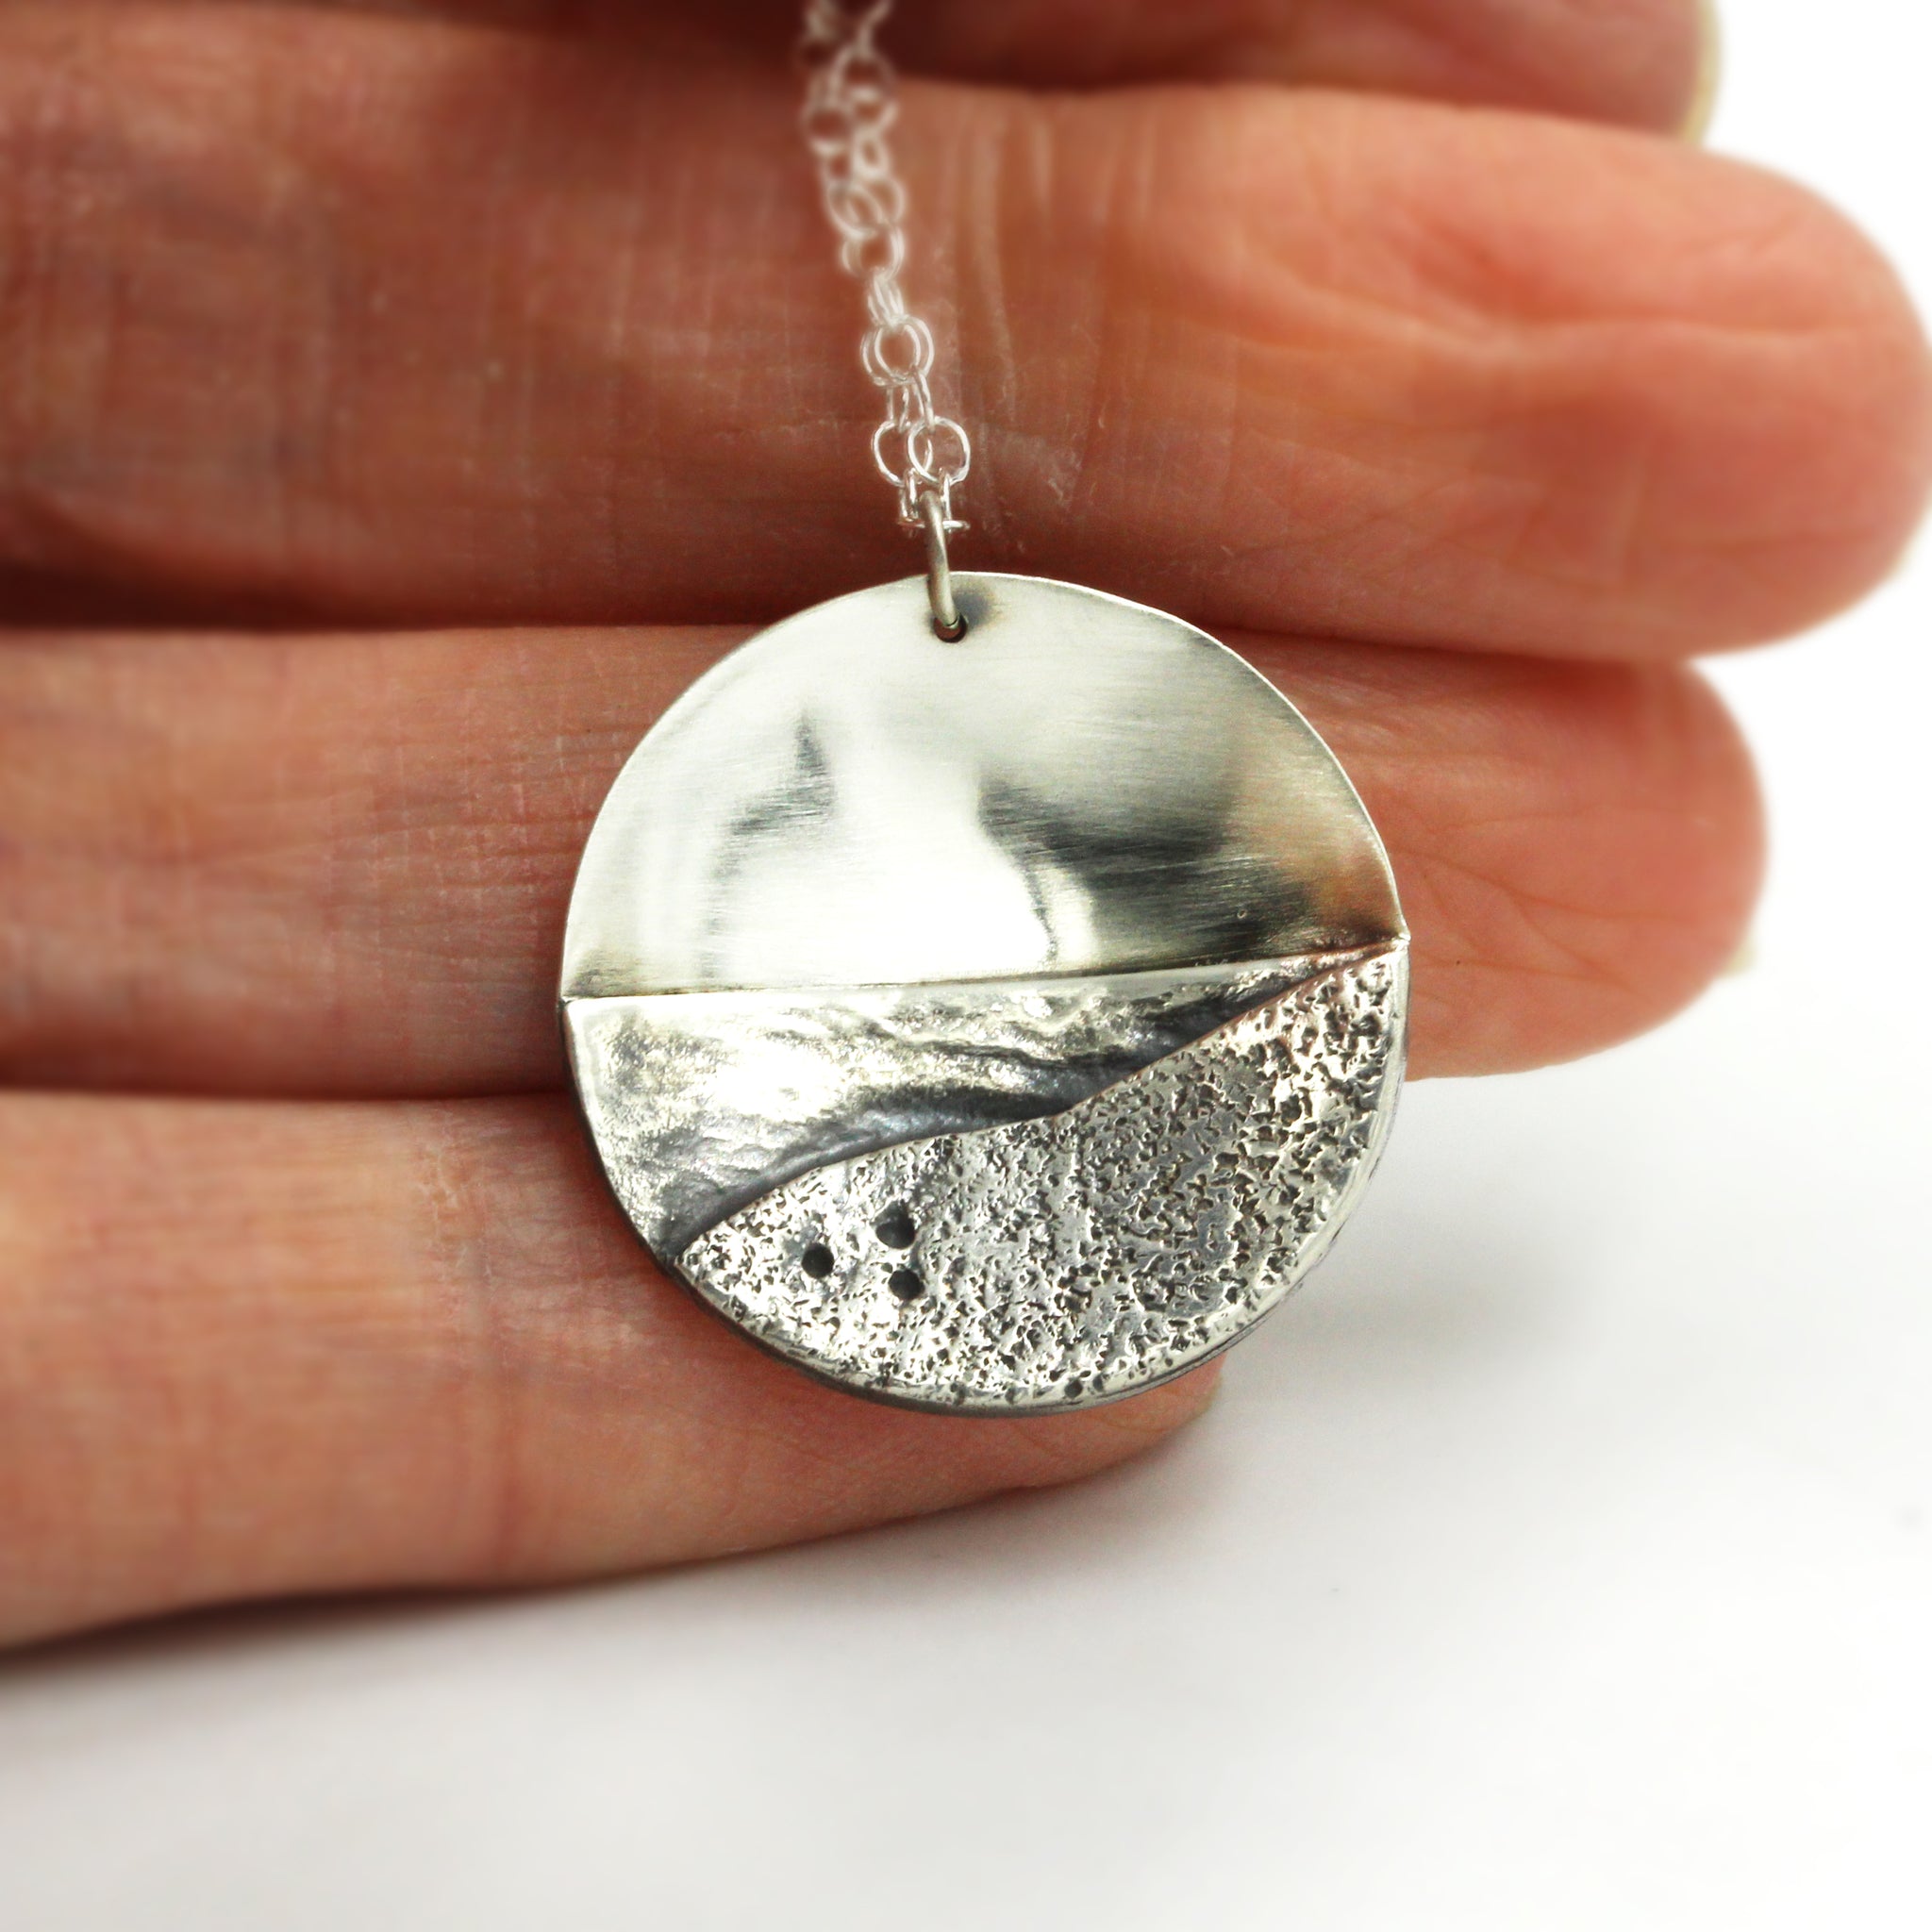 Sterling silver necklace, showing a moonlit beach. Handnmade recycled silver necklace.